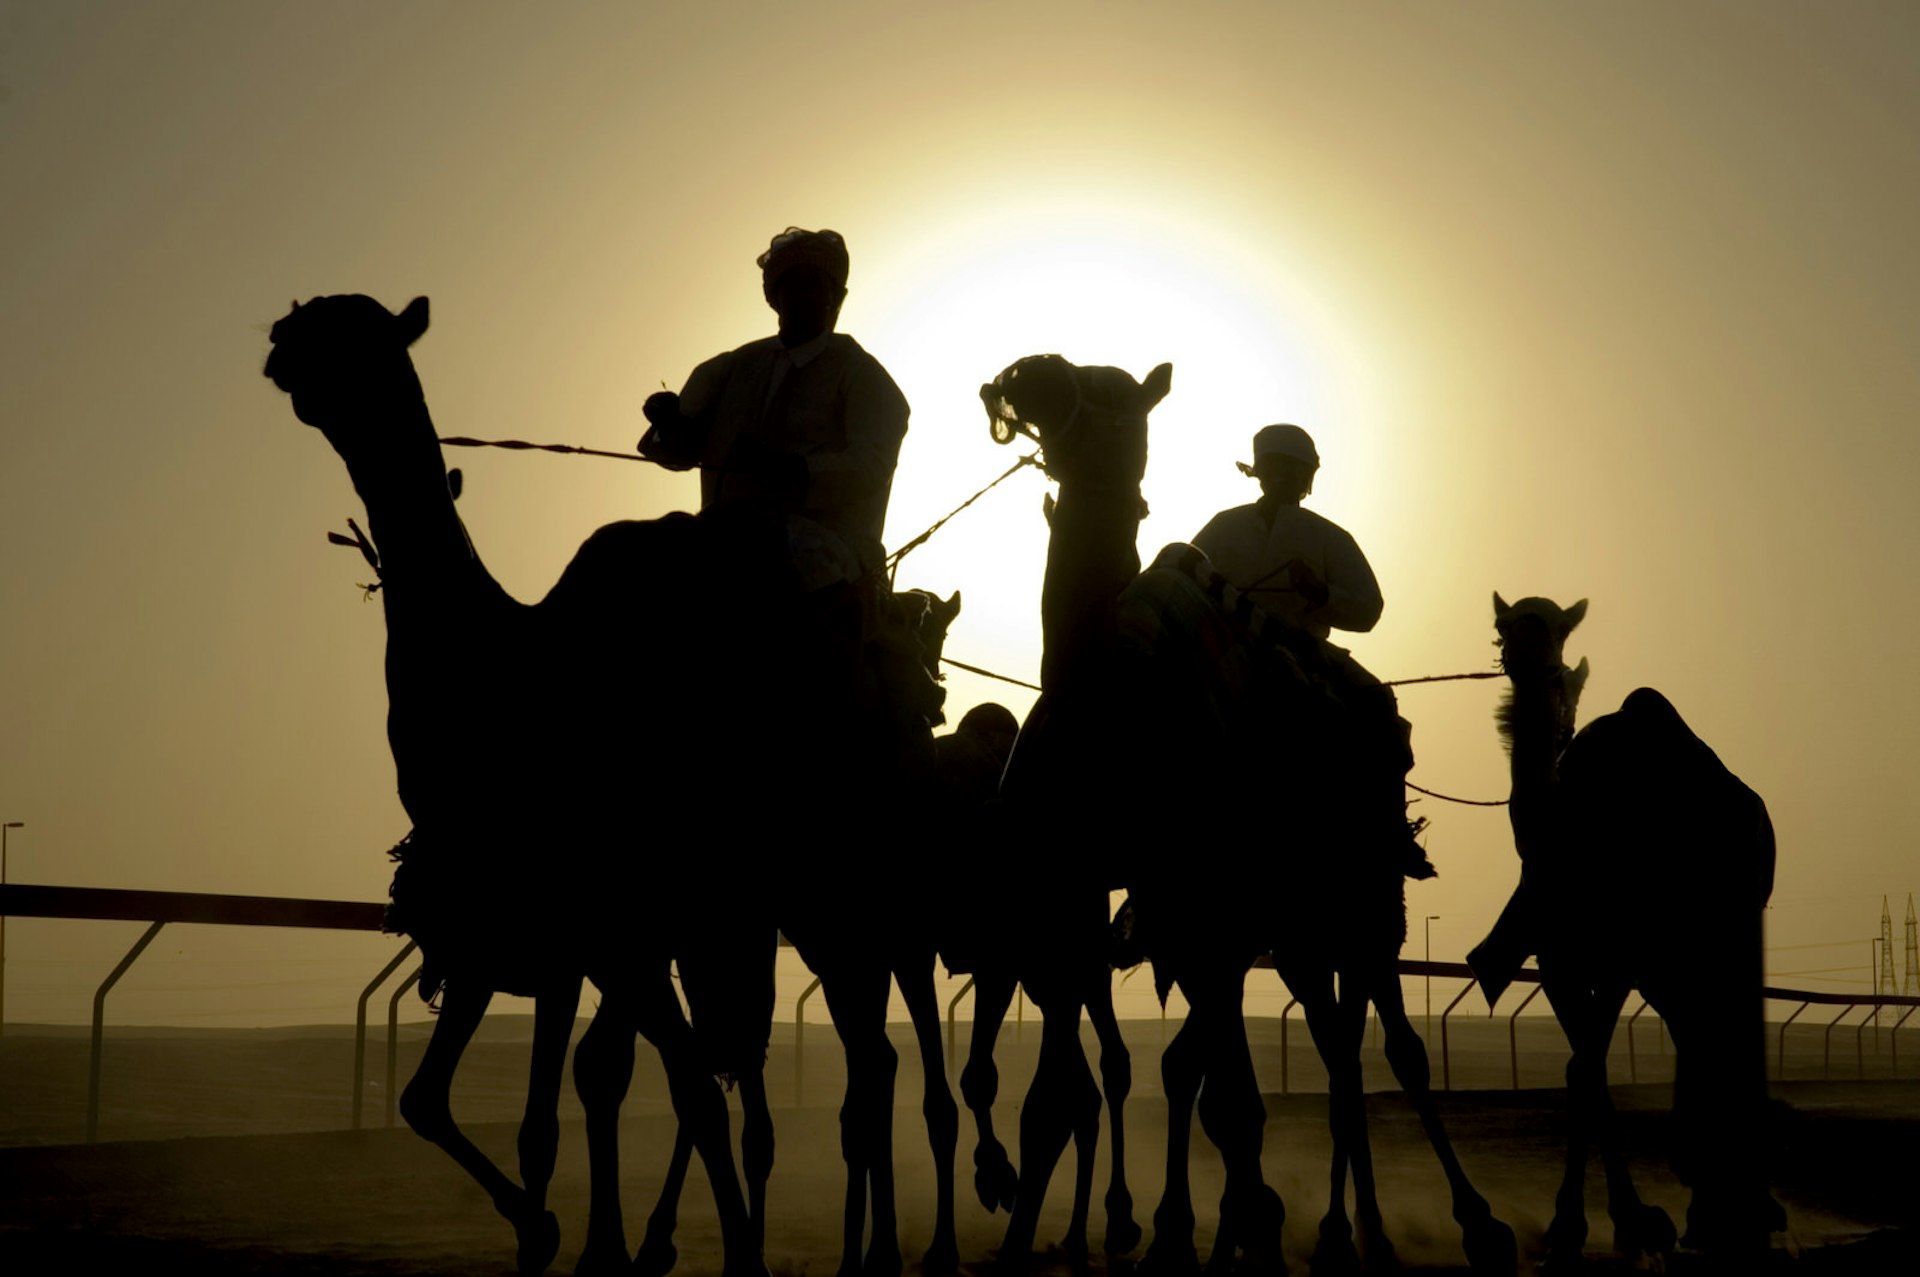 Camel race in Dubai. Image by naes / Getty